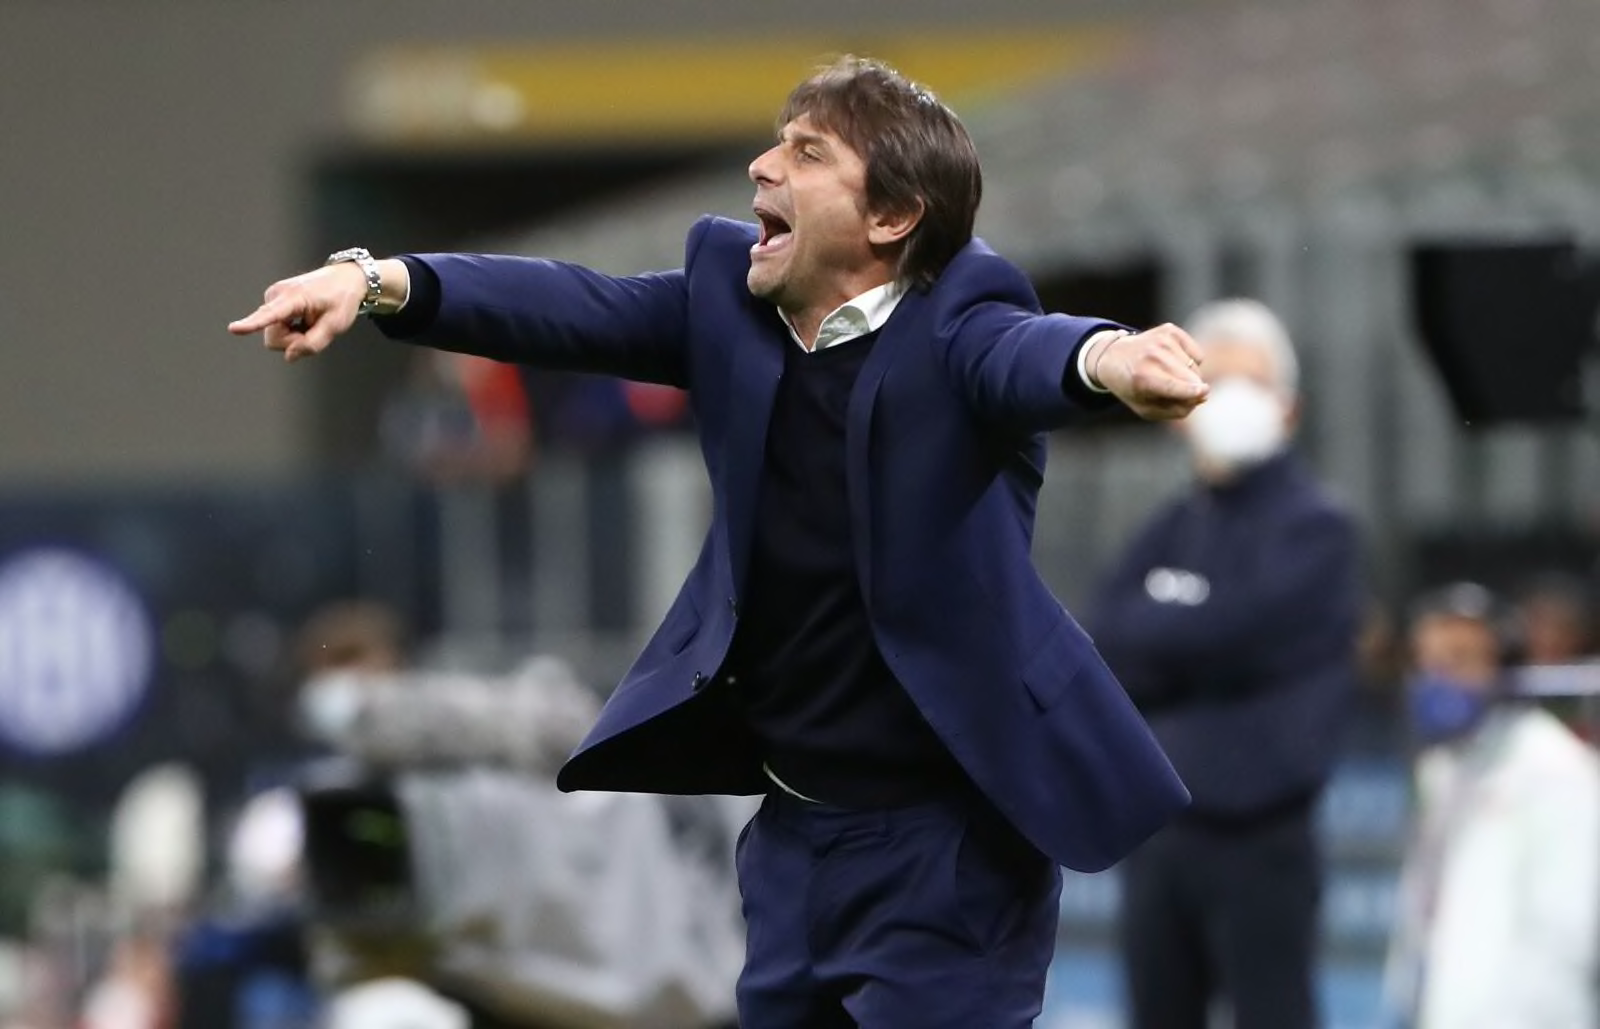 Conte signs with Tottenham